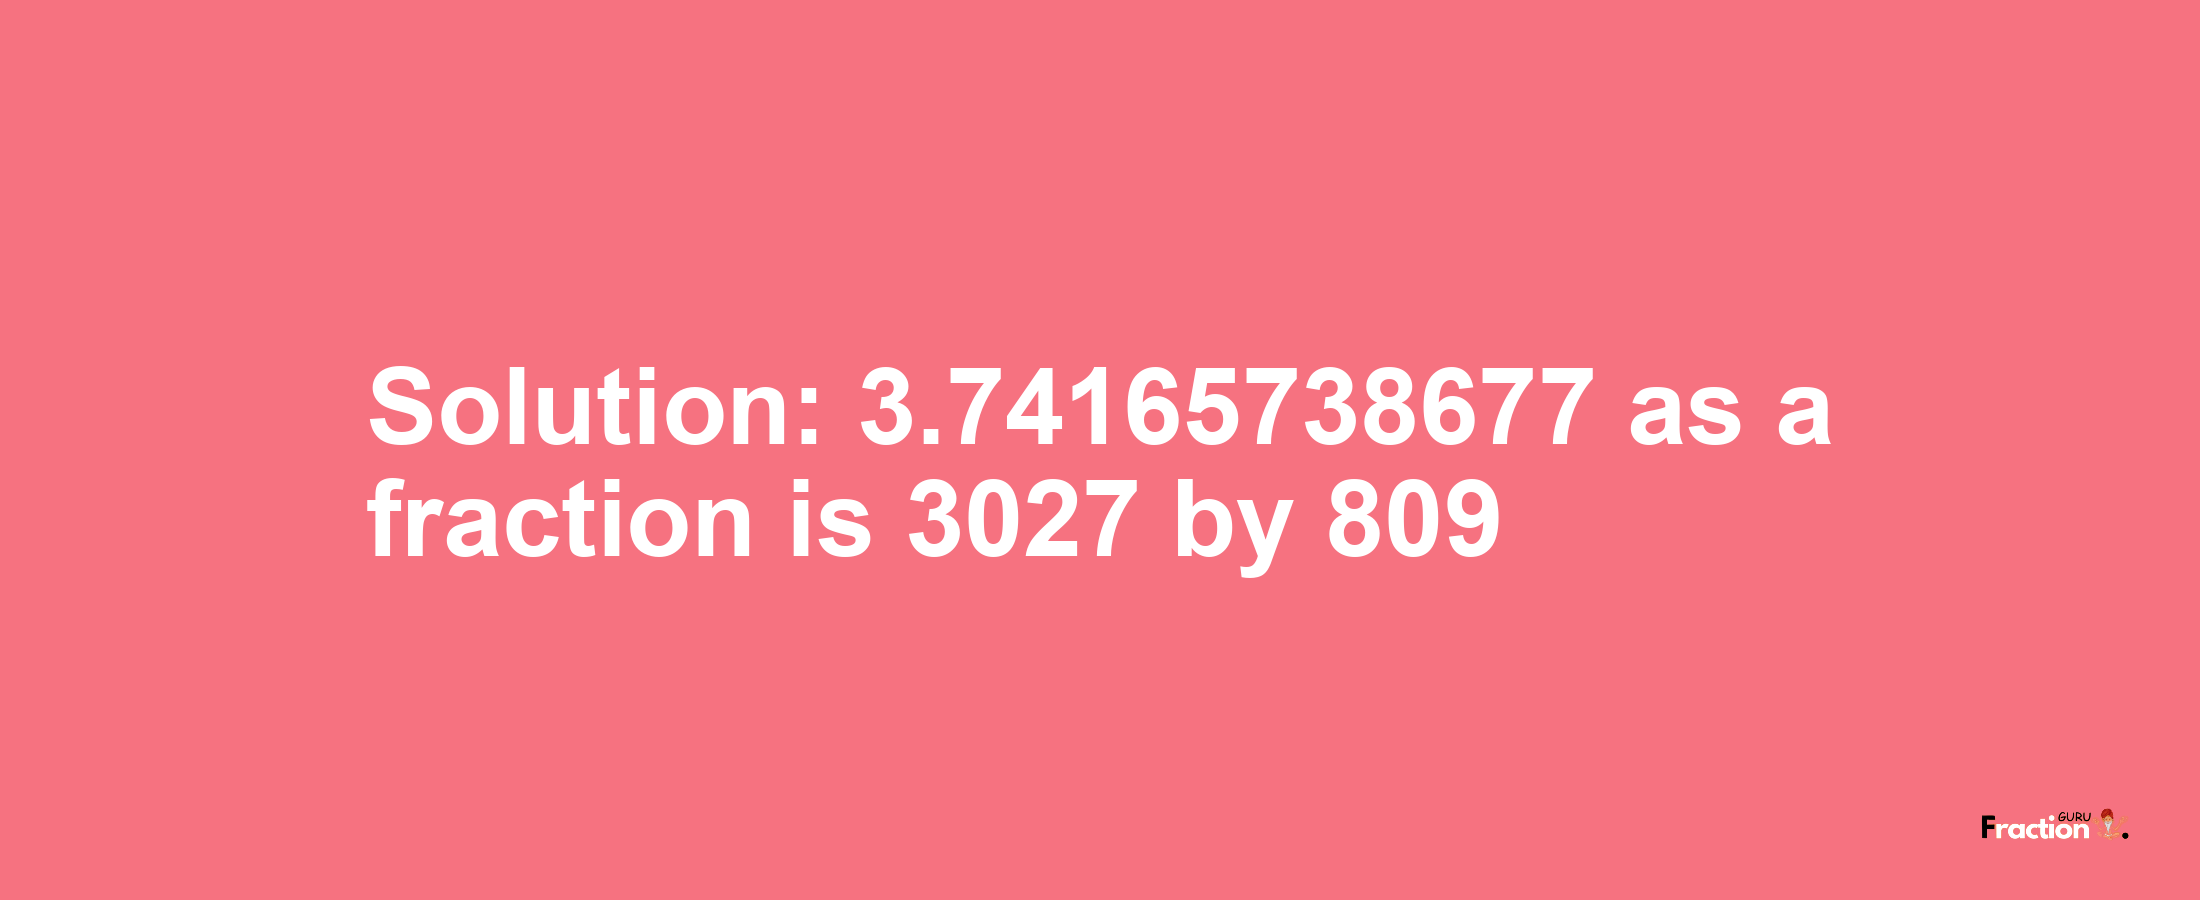 Solution:3.74165738677 as a fraction is 3027/809